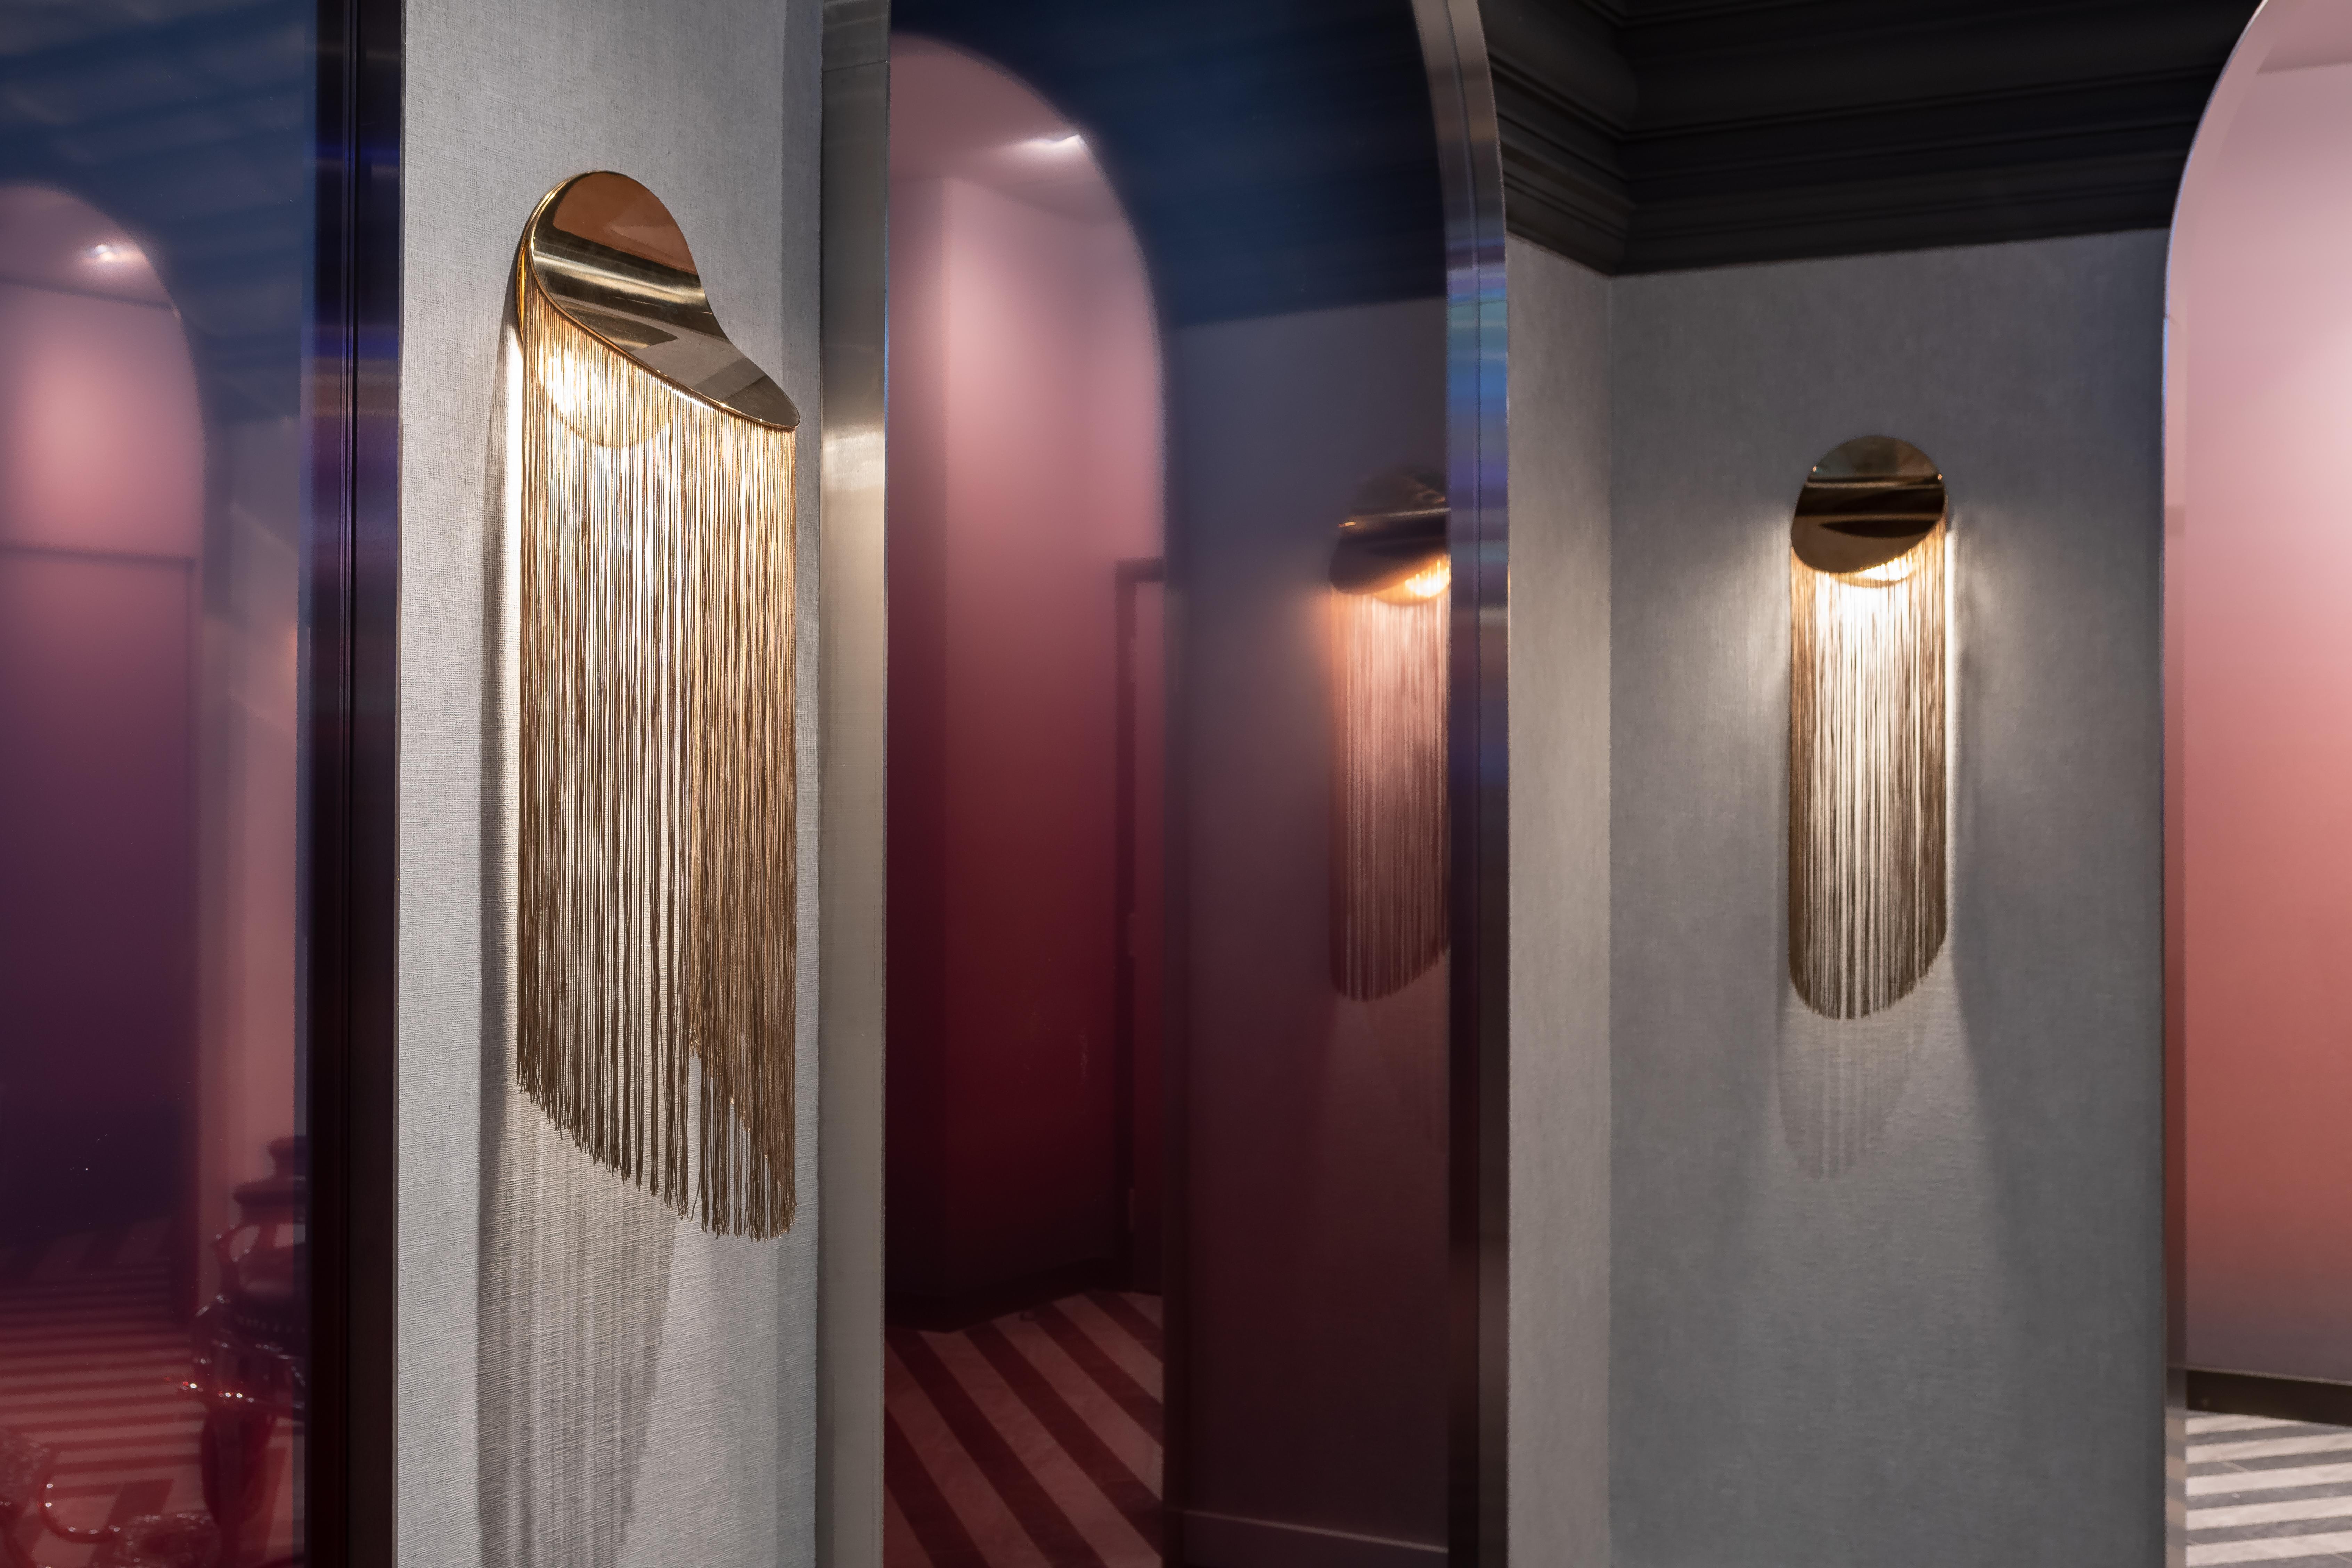 Cé Wall is a contemporary wall sconce with fringes and soft curves. The unique movement of the fringes brings a fluid effect, distinguishing this piece from previous collections, all the while remaining faithful to the minimalist look of candid